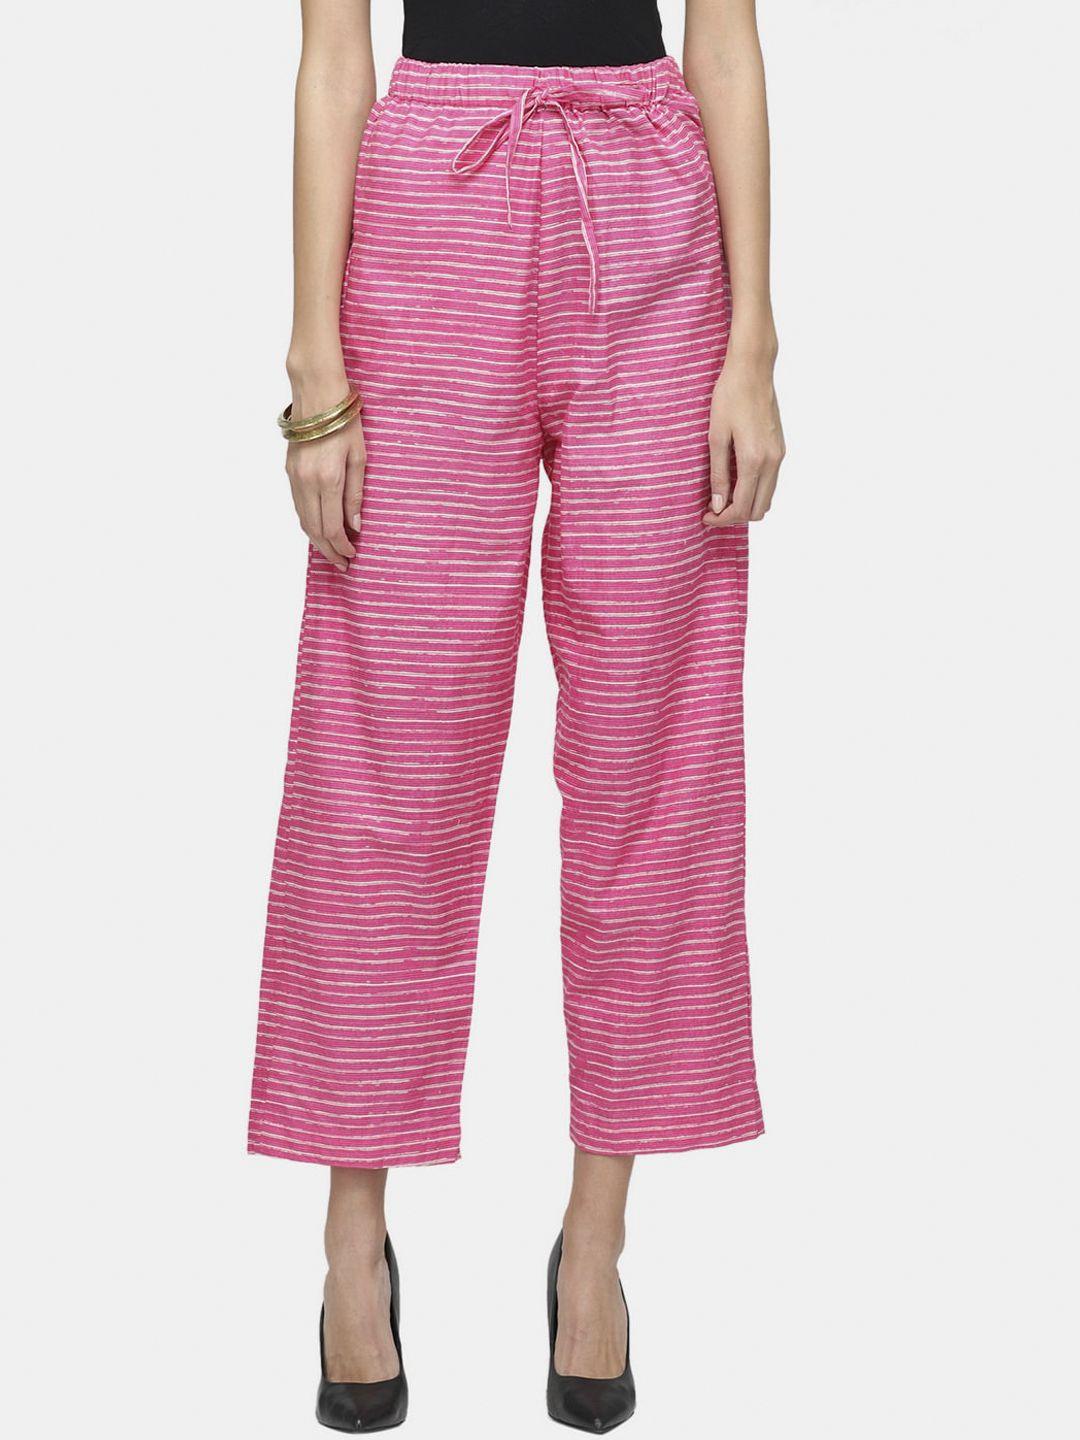 enchanted-drapes-women-pink-striped-trousers